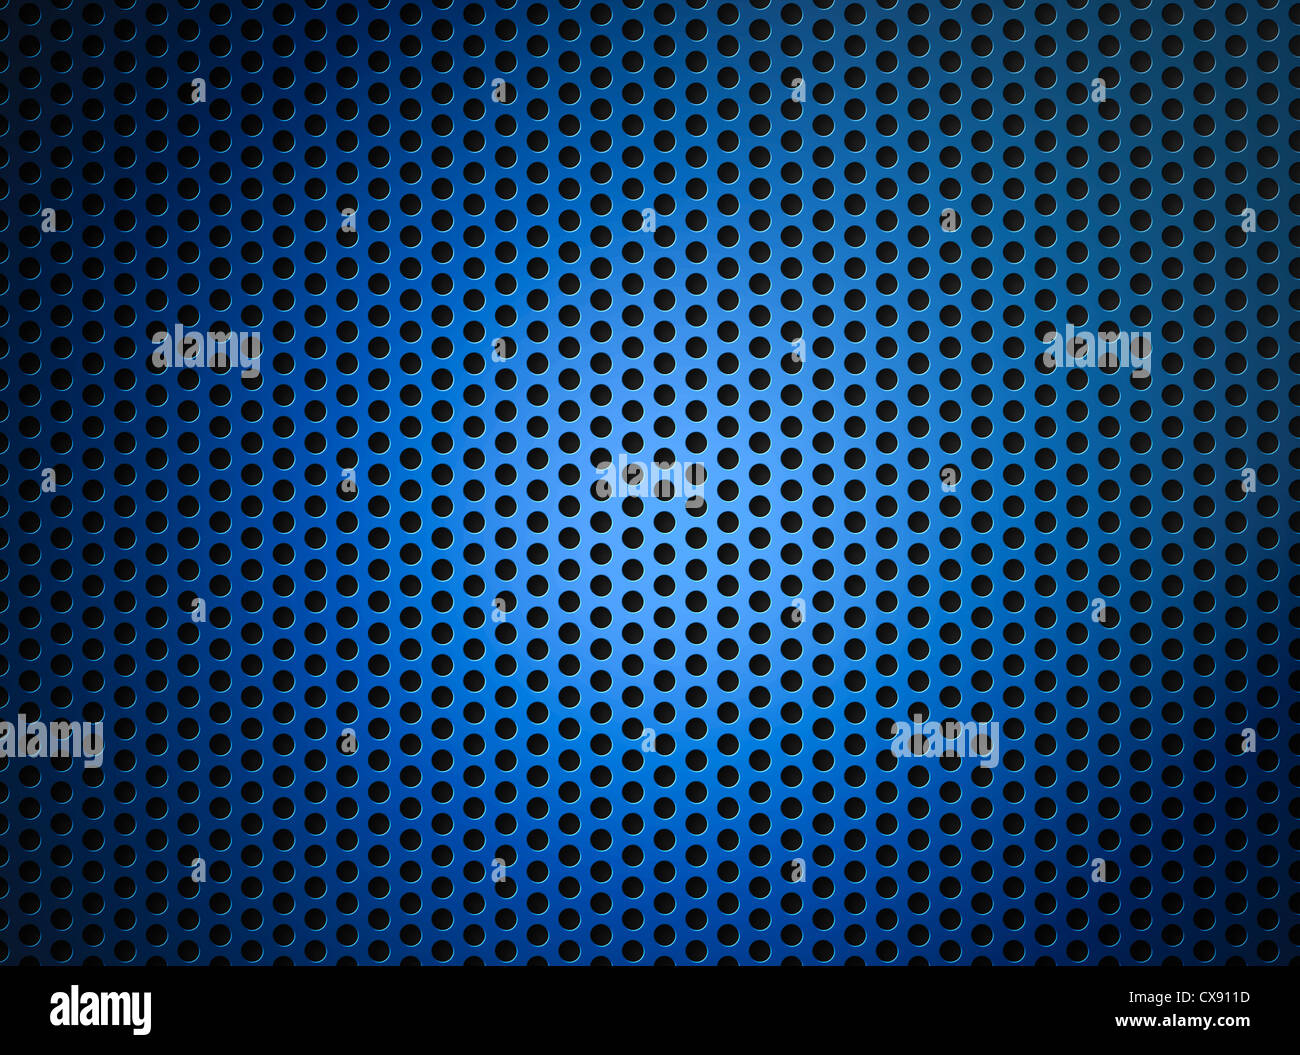 blue metallic grid or grille background Stock Photo